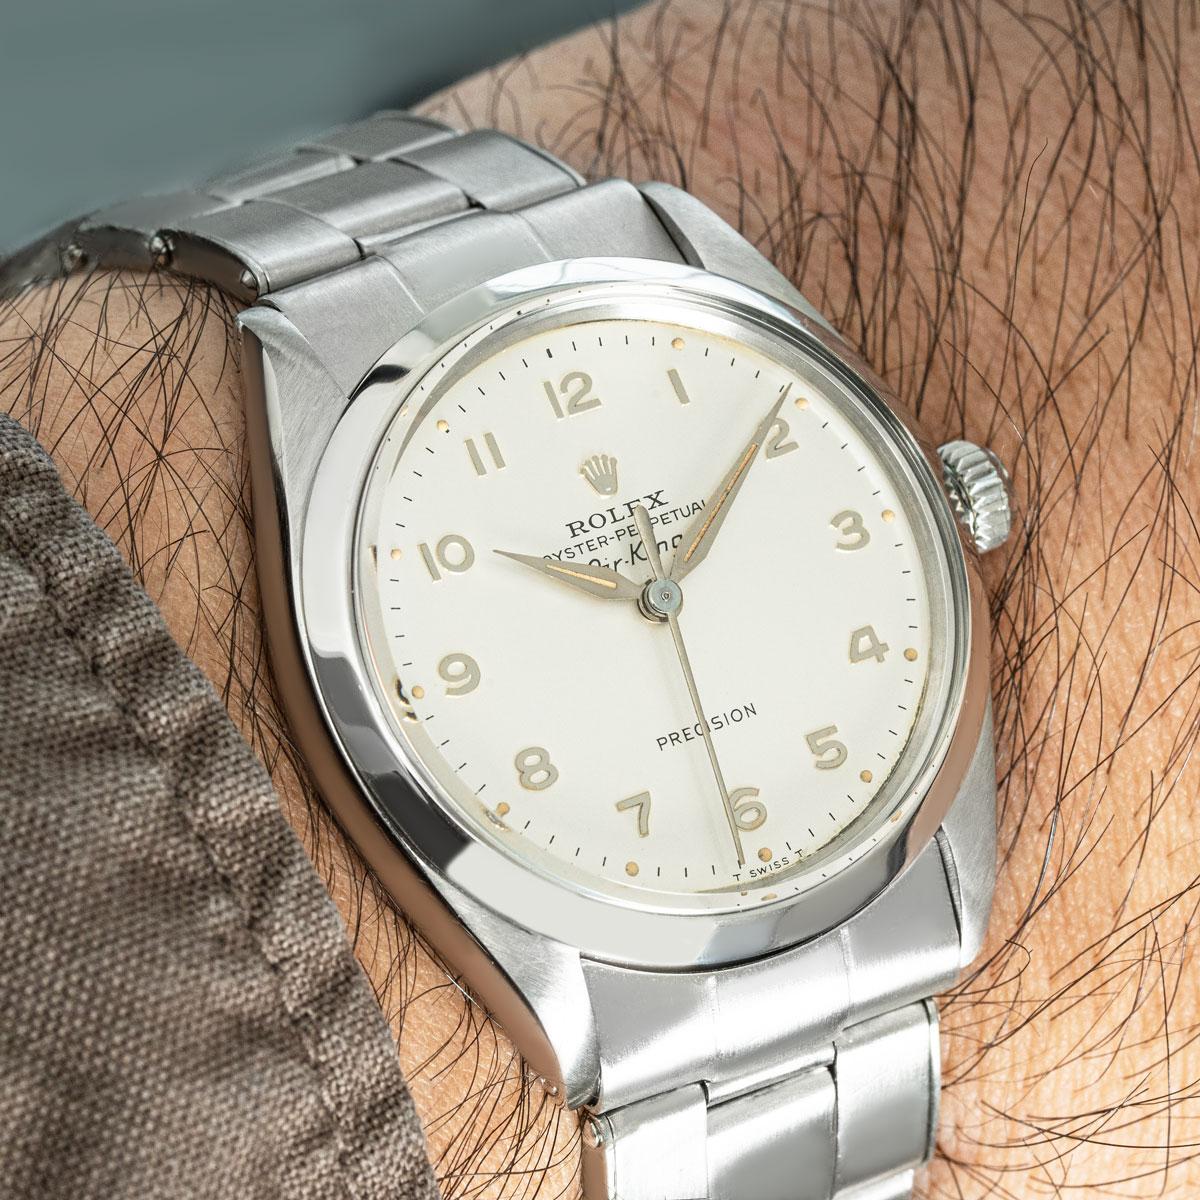 A vintage 34mm Air-King by Rolex in stainless steel. Featuring an extremely rare silver dial with Arabic numerals throughout from 1 to 12. This is by far the most seldom and striking configuration of a 5500 dial as most only feature Arabic numerals